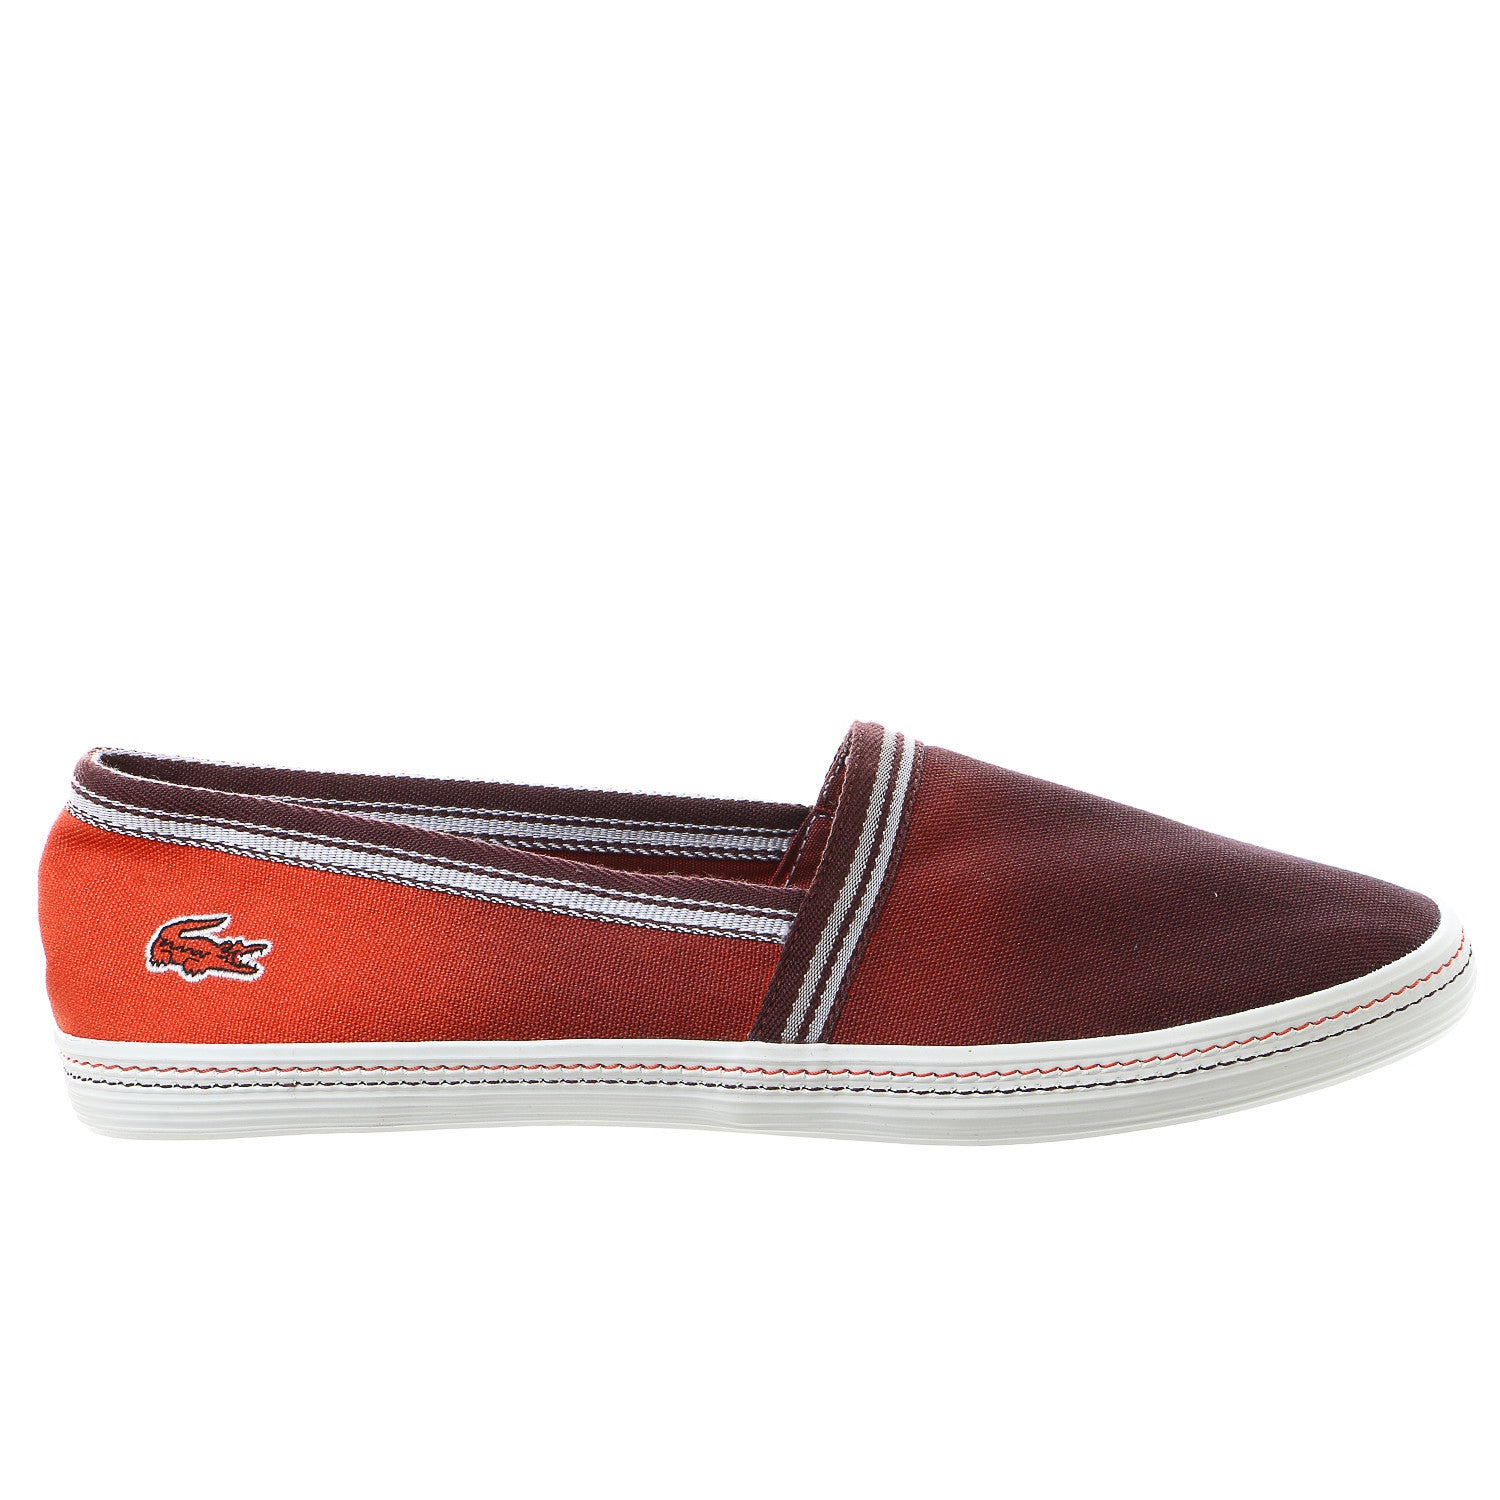 Lacoste Aimard 7 Fashion Slip On Shoe - Brown/Red - Mens - Shoplifestyle